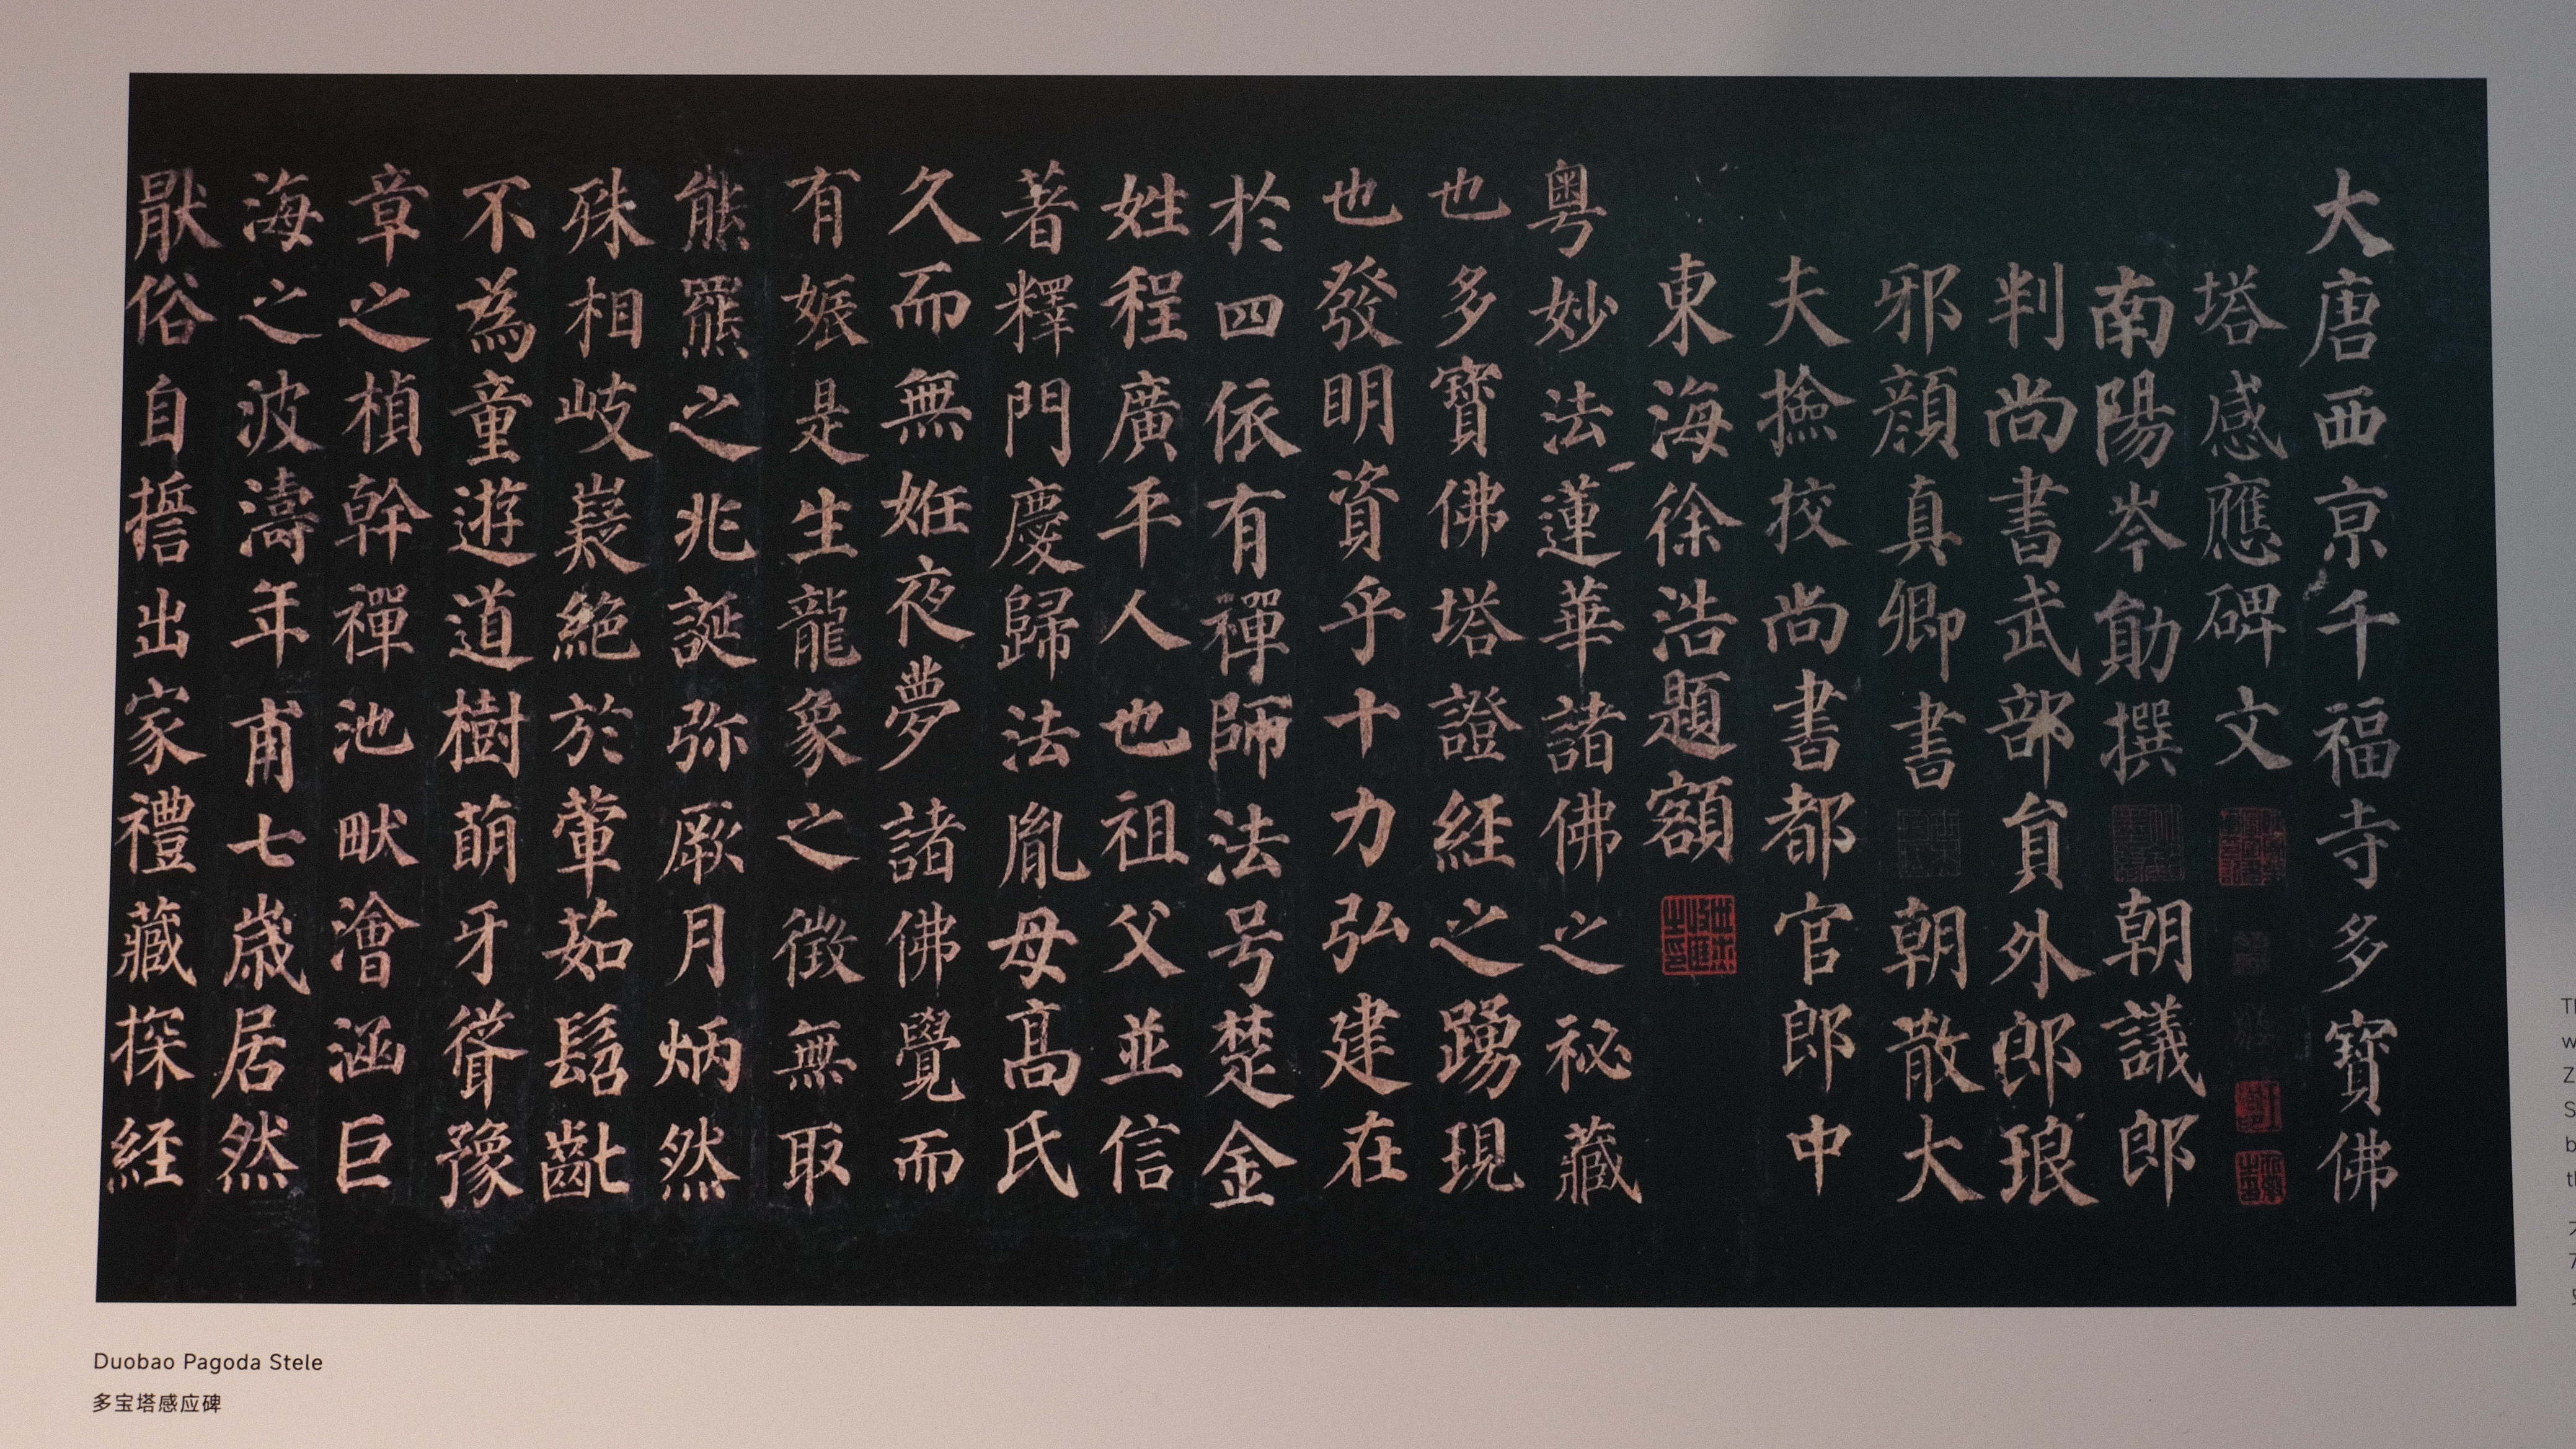 Duobao Pagoda Stele was erected in 752 AD. The words were composed by Cen Xun, written by Yan Zhenqing in the regular script, and engraved by Shi Hua. It records how monk Chu Jin built the Duobao Pagoda. /CGTN